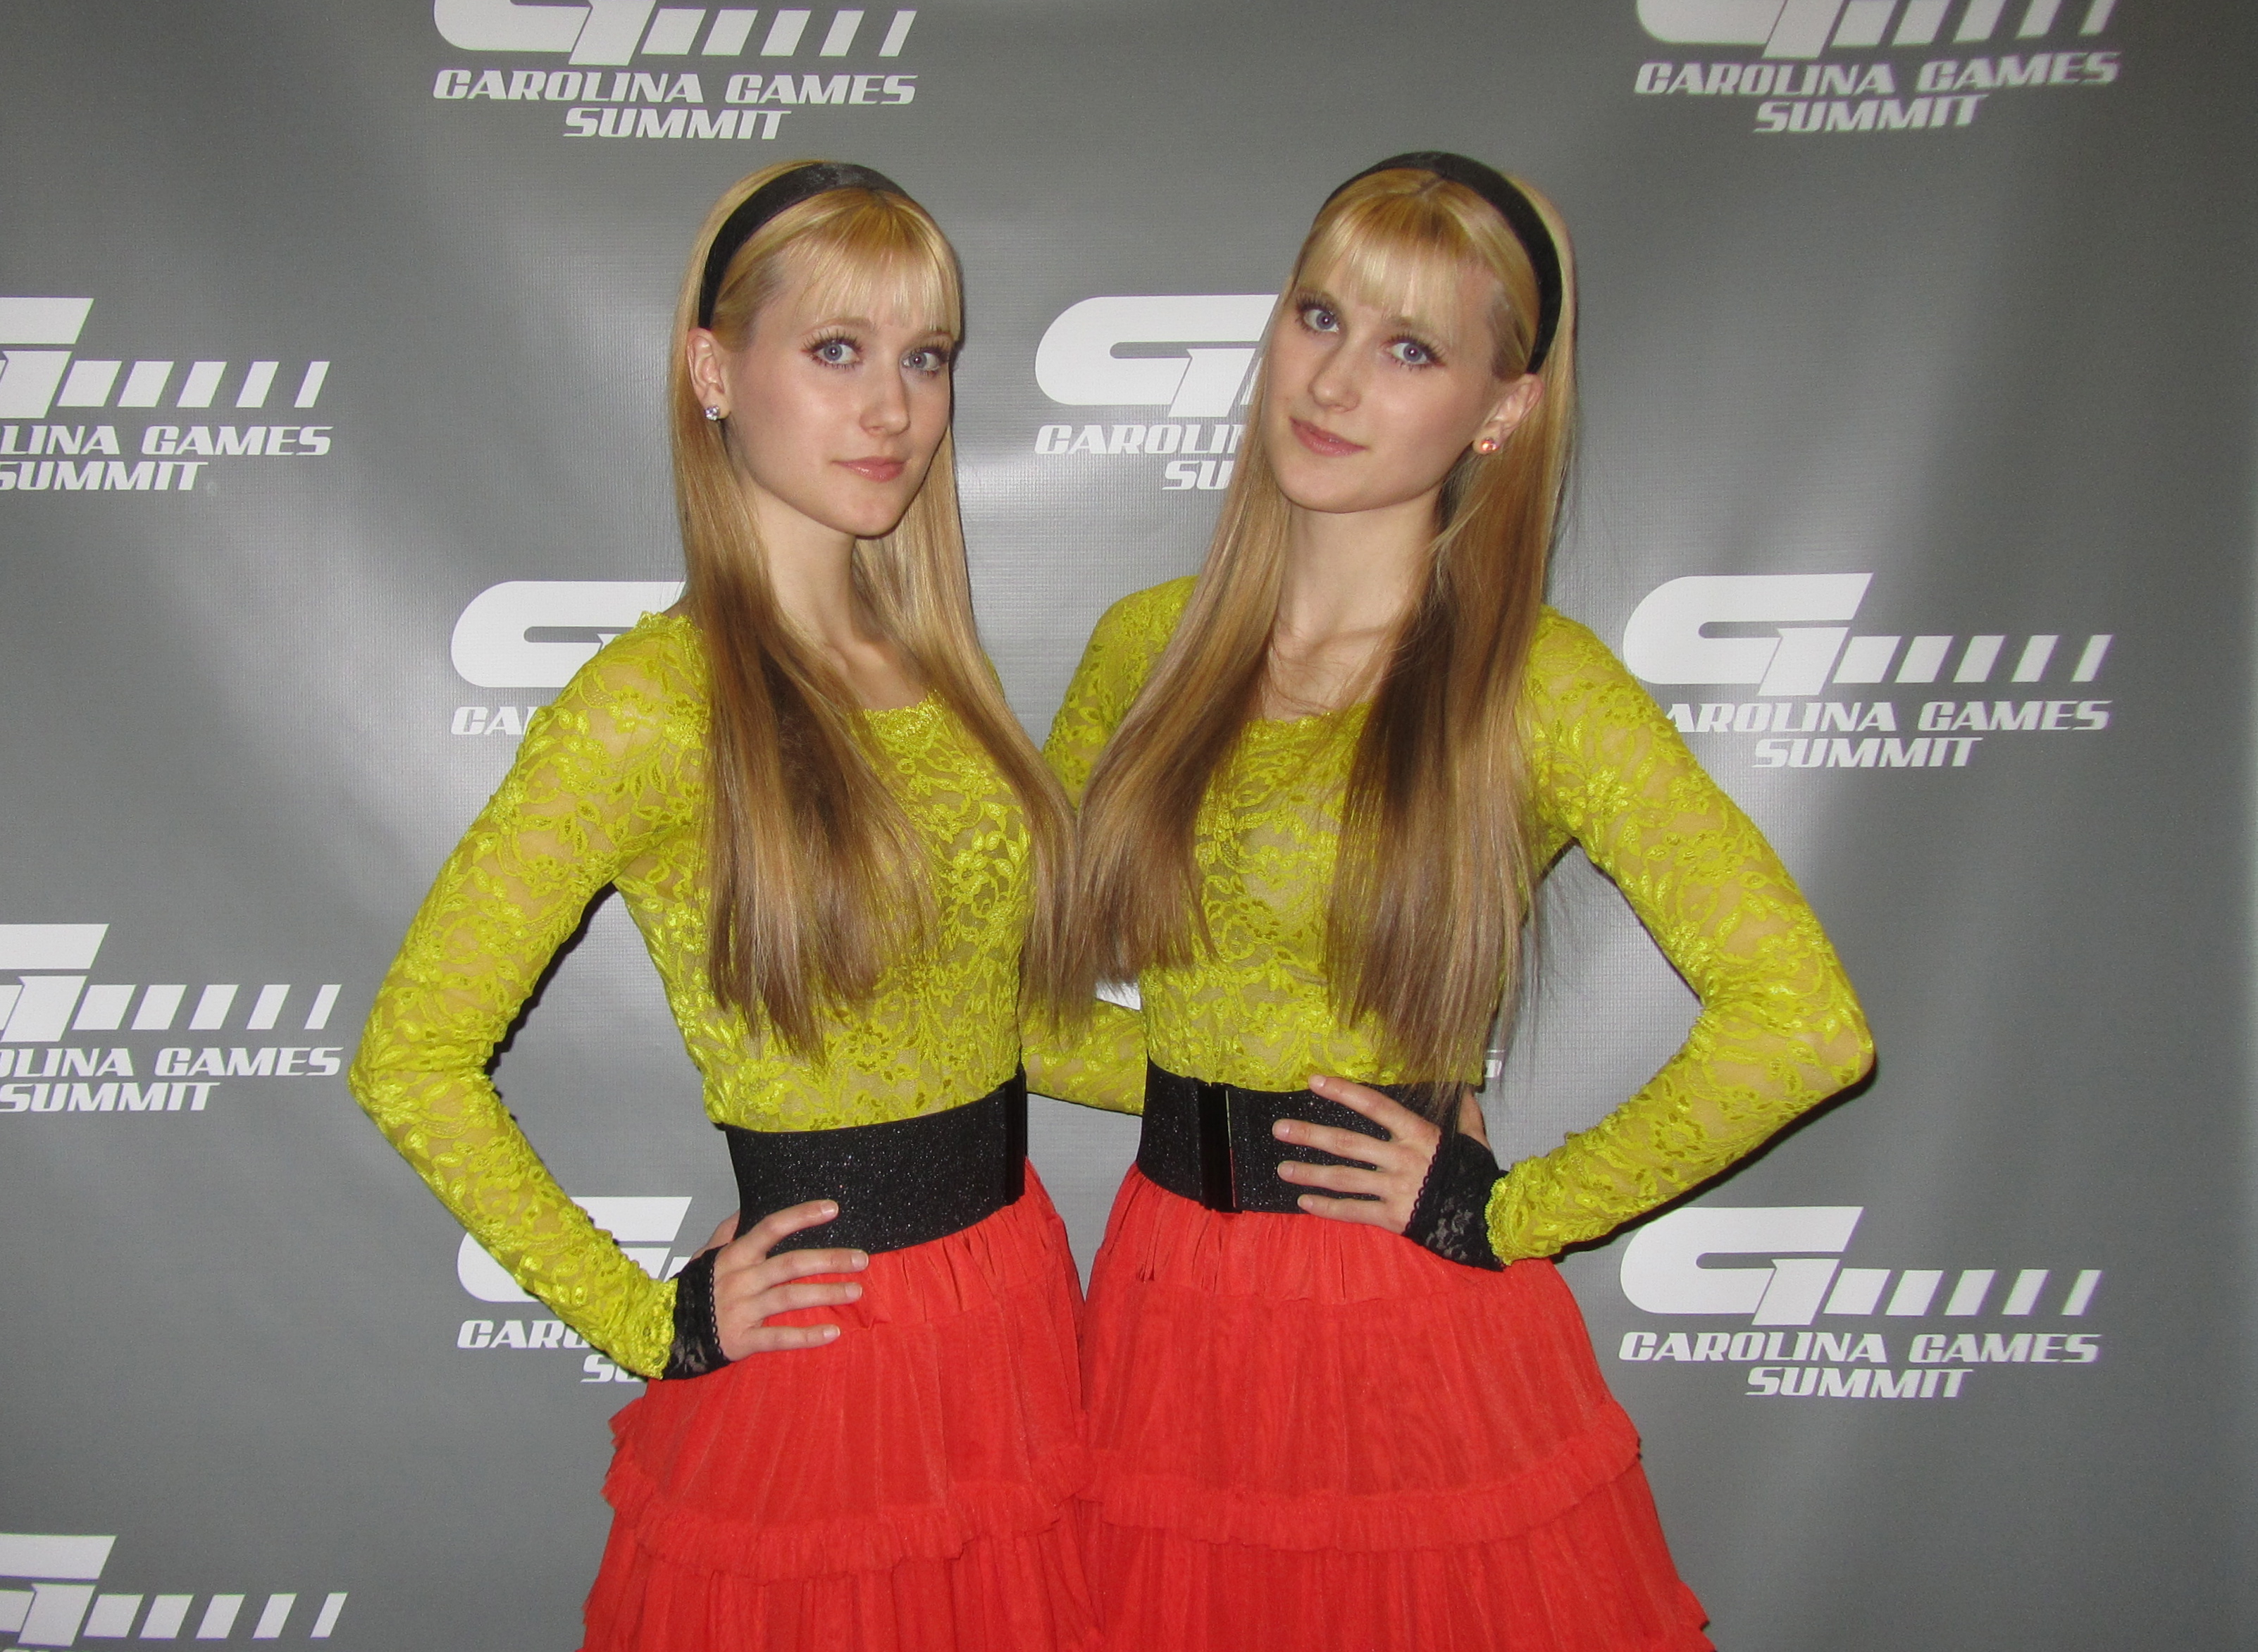 Camille and Kennerly Kitt (The Harp Twins)